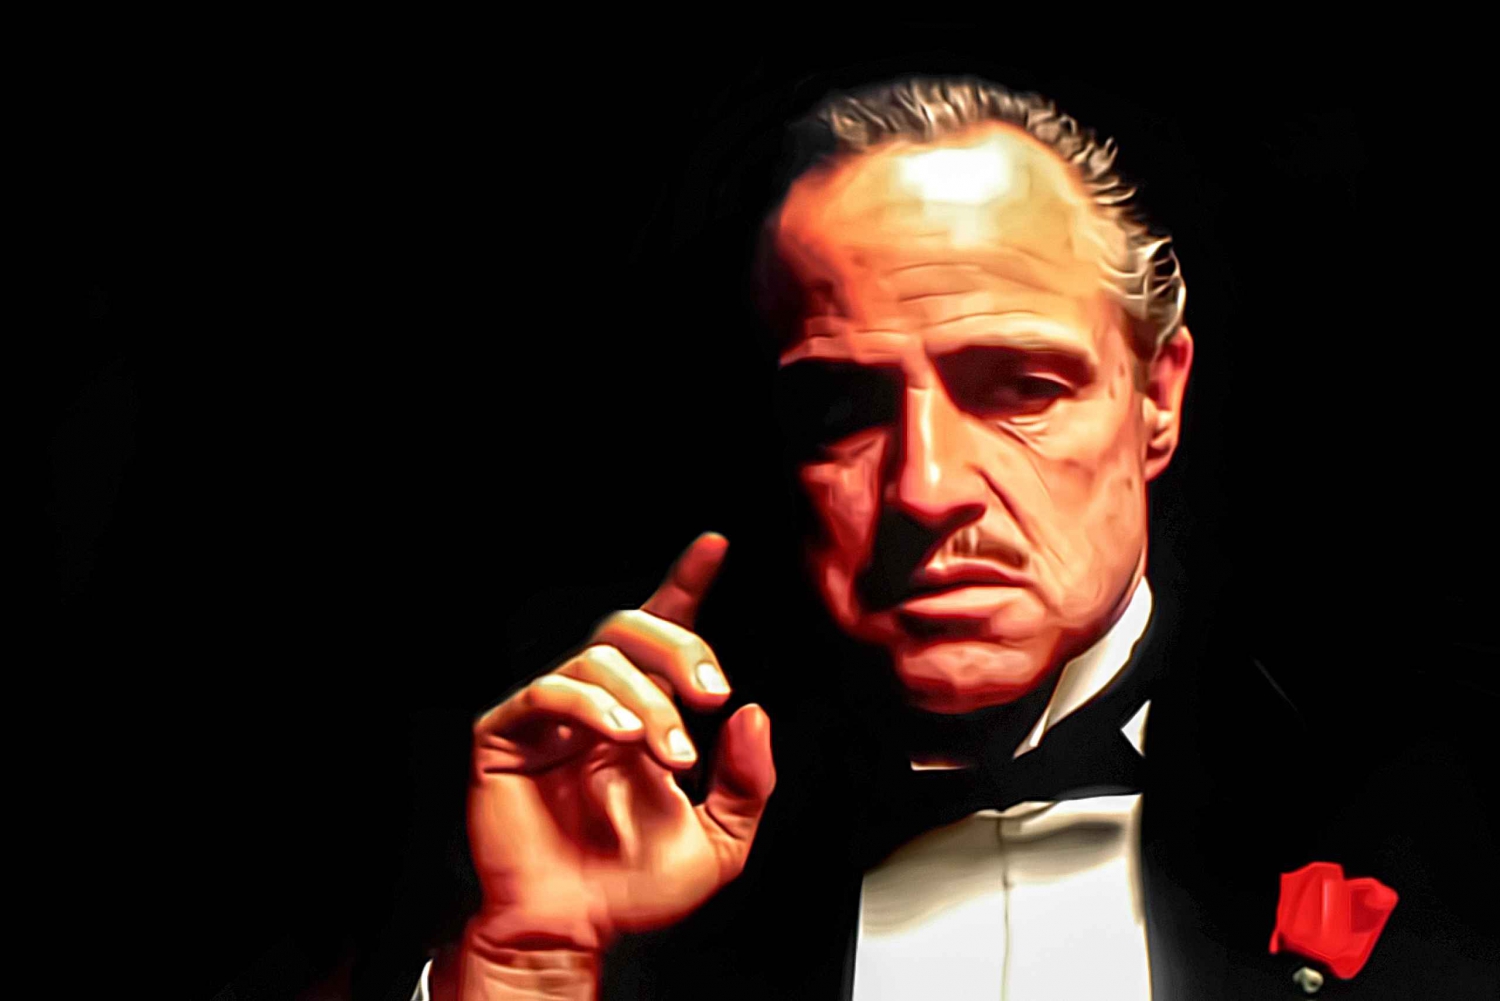 Sicily: The Godfather Filming Locations Tour